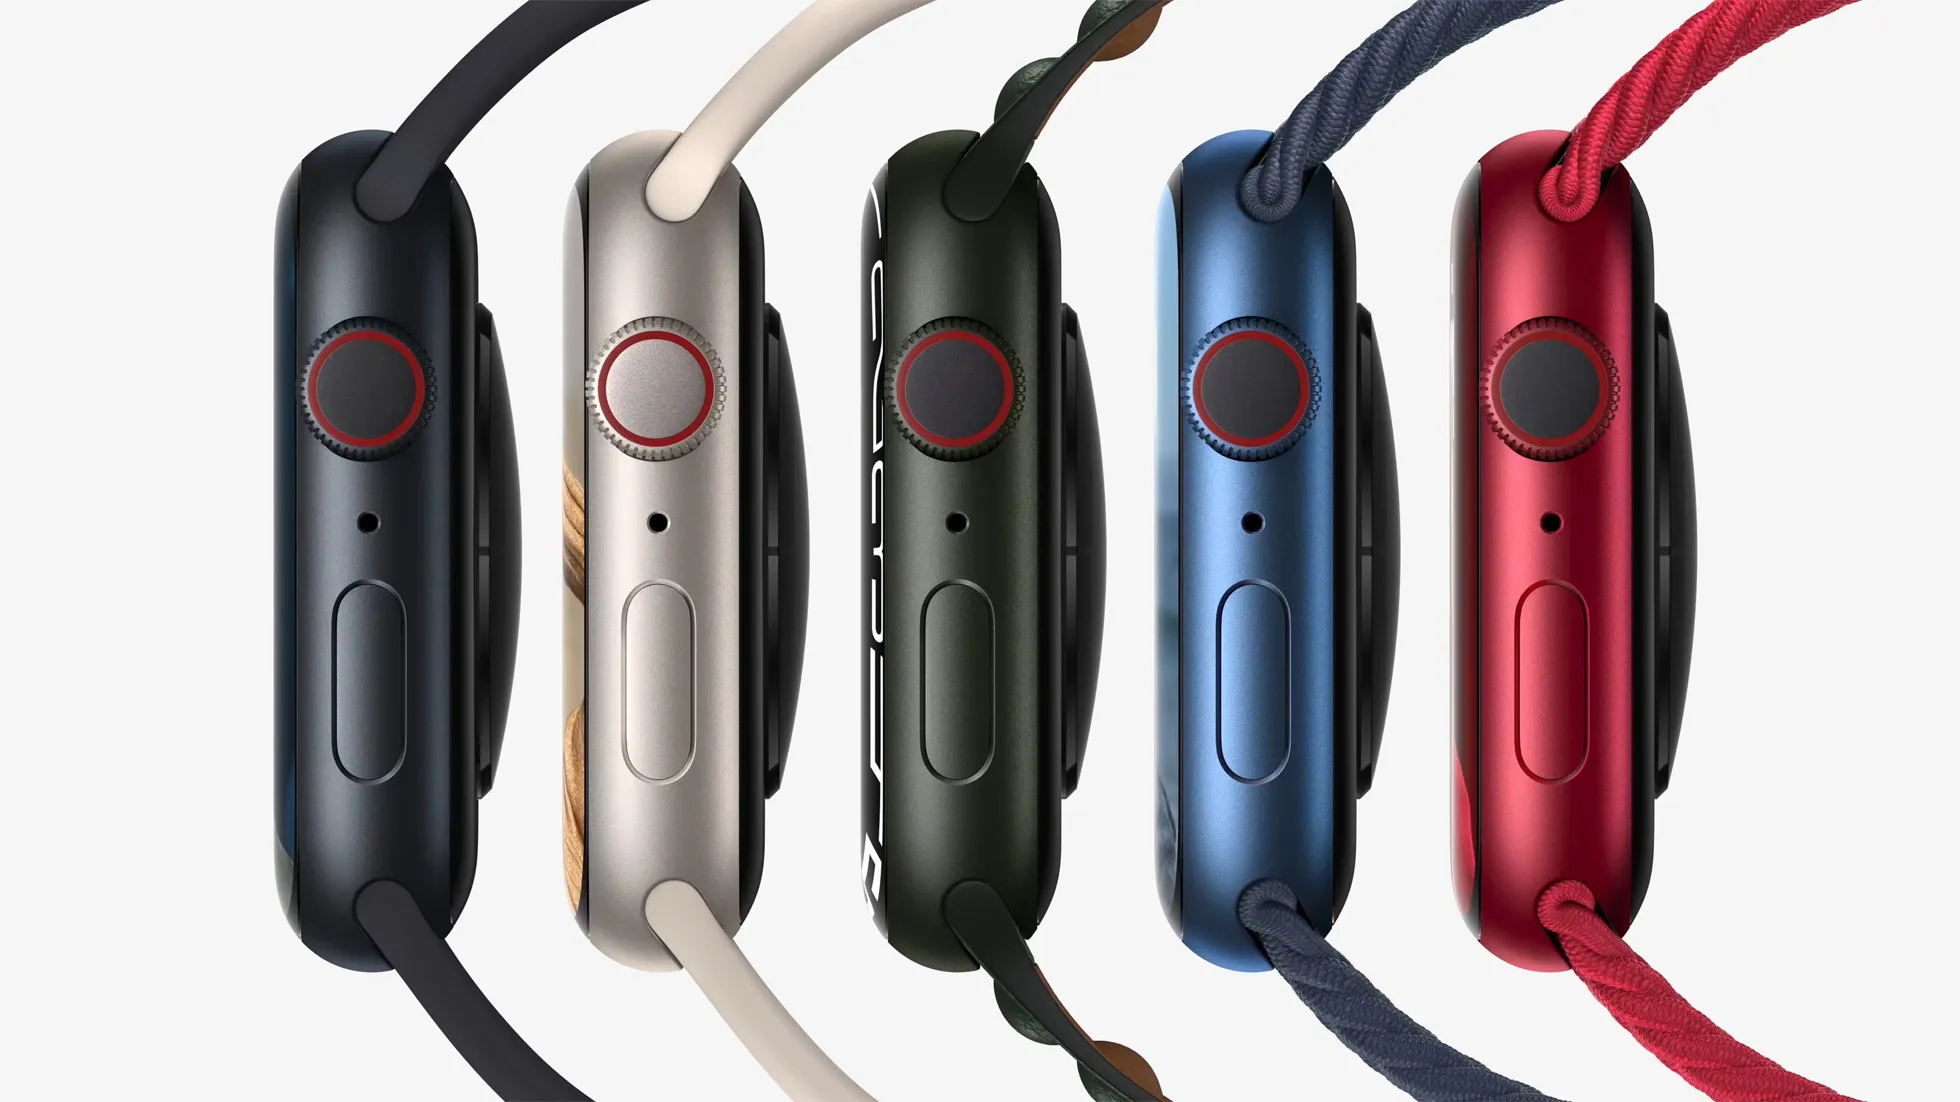 A side view of all the Apple Watch Series 7 models and colors